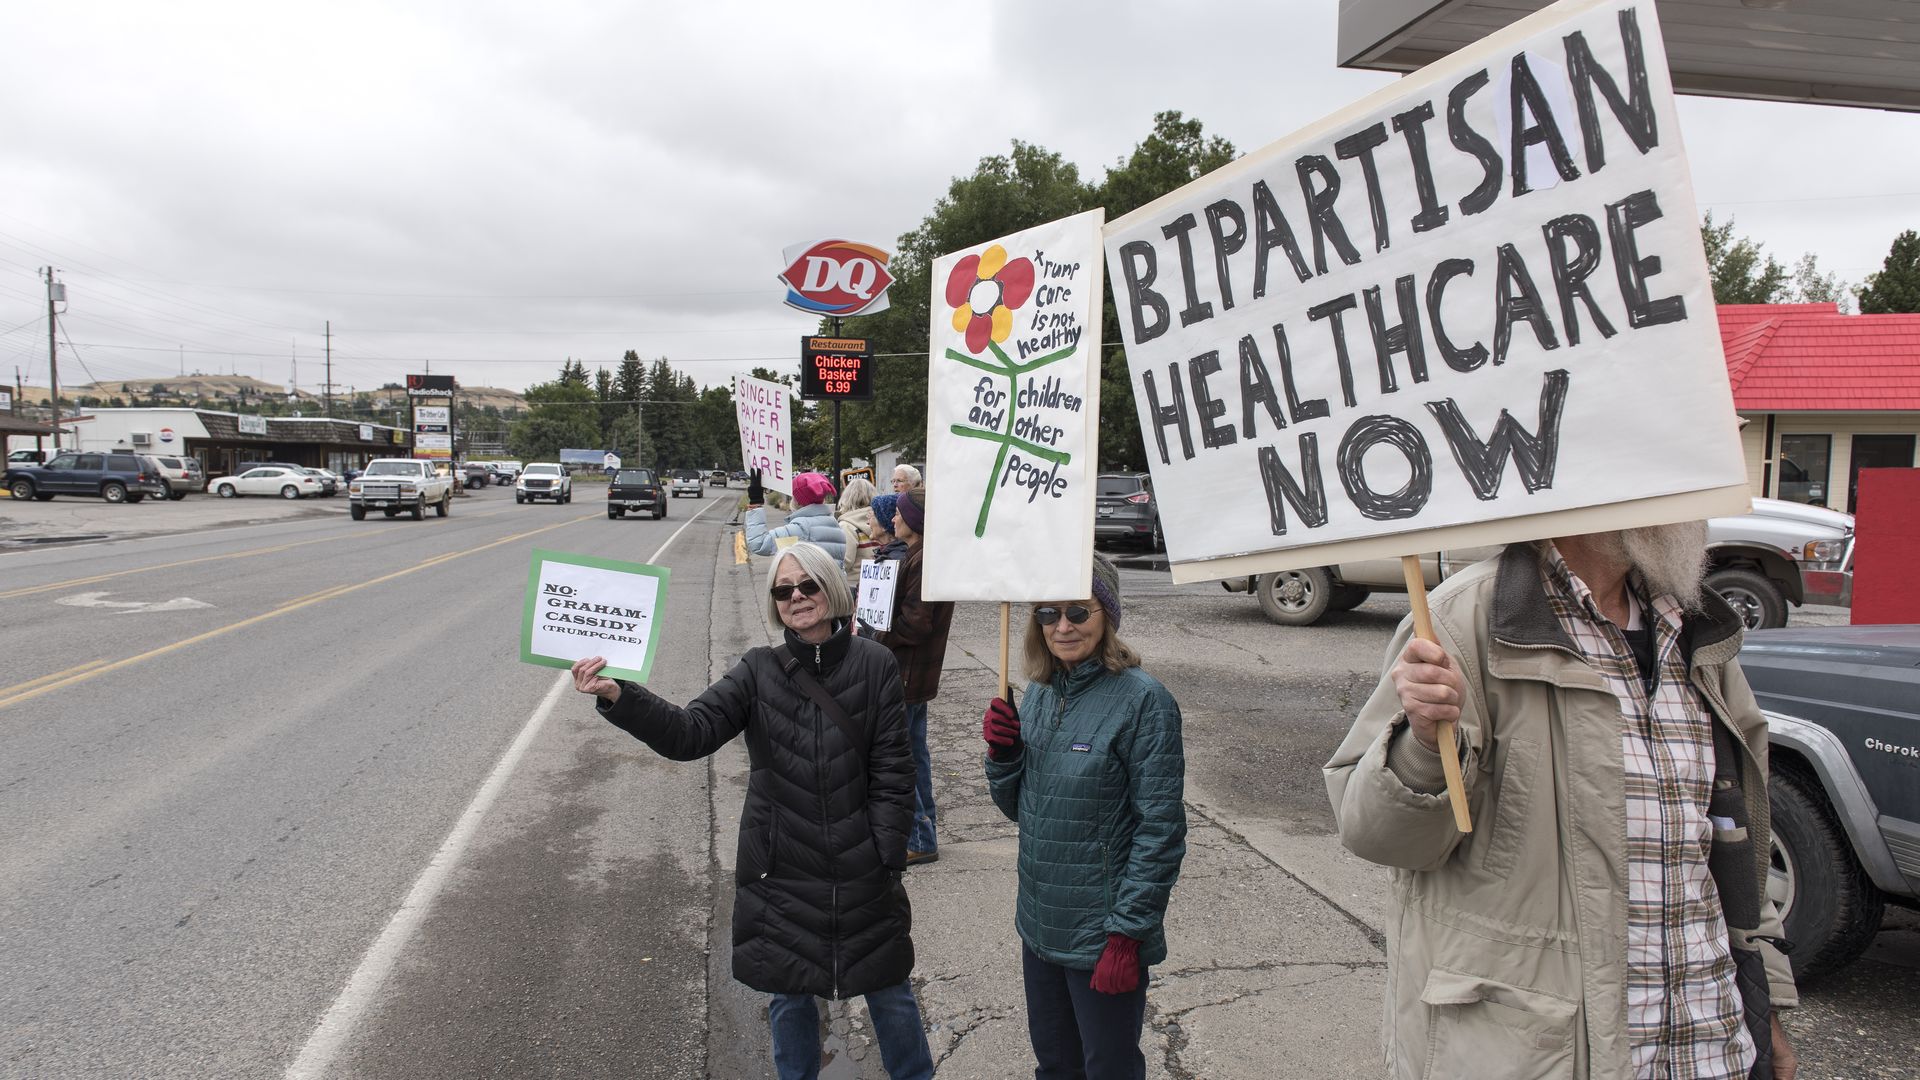 Protesters hold a small peaceful demonstration in support of health care.